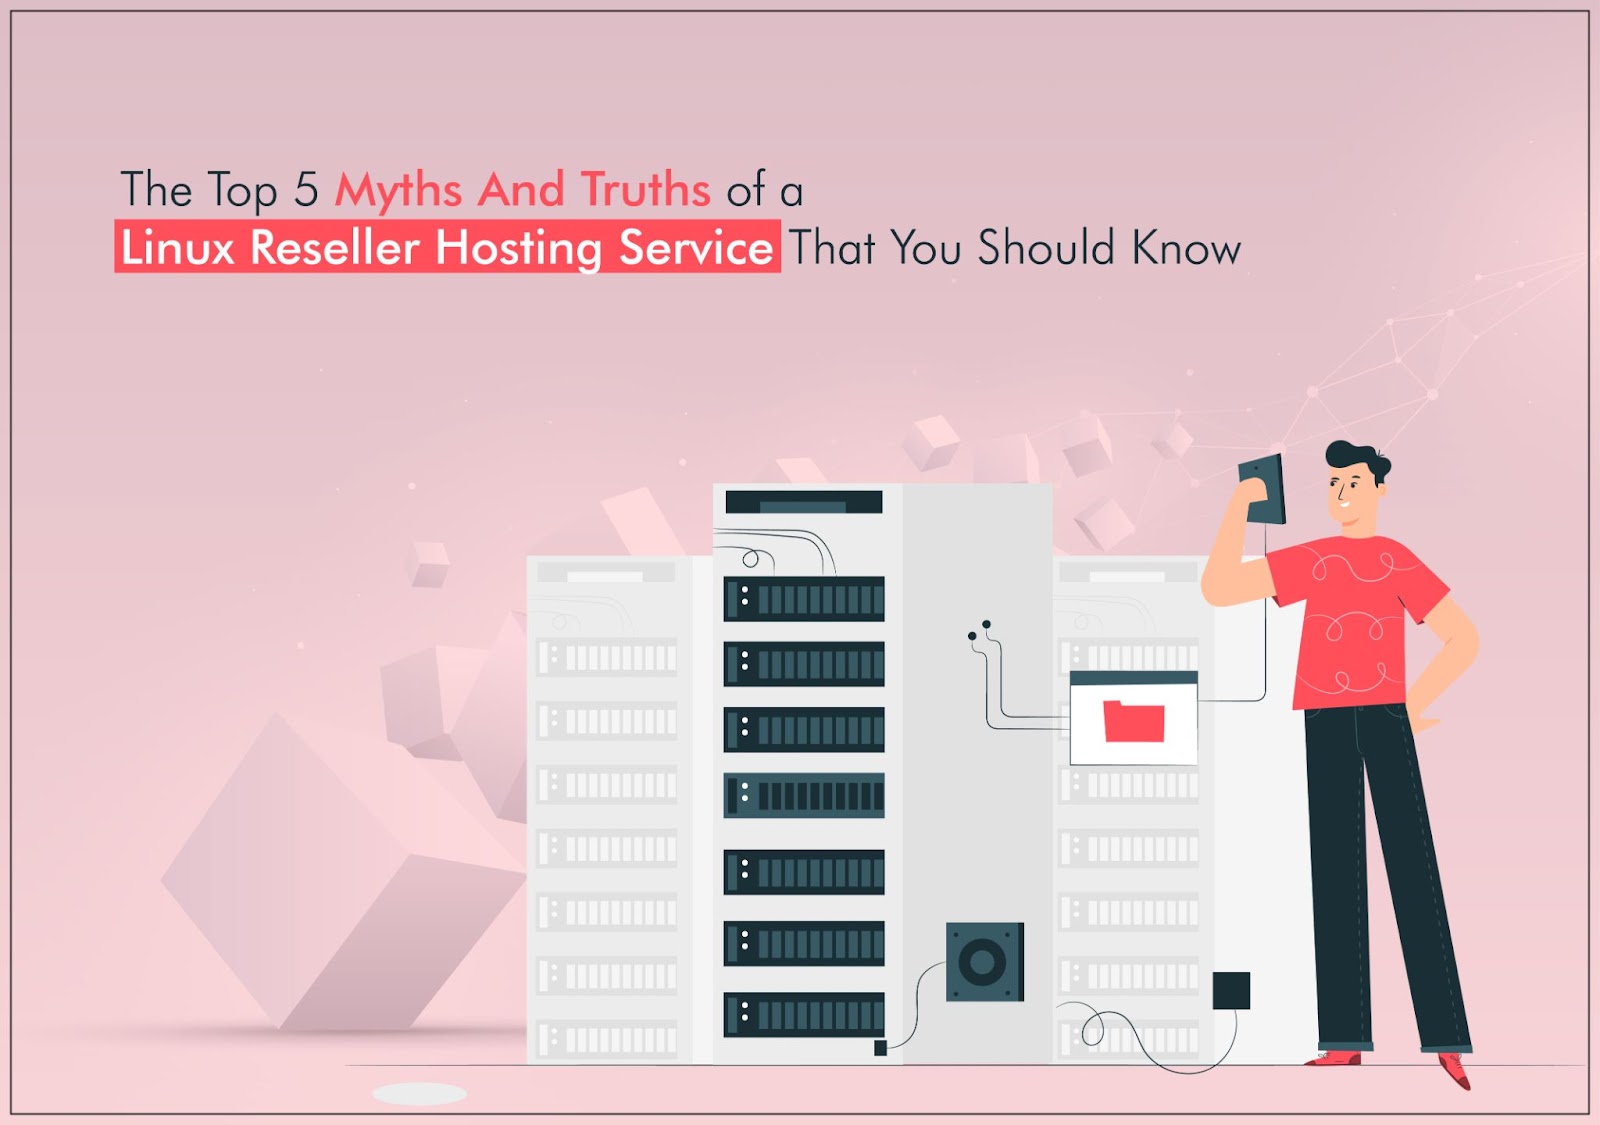 Myths And Truths of a Linux Reseller Hosting Service That